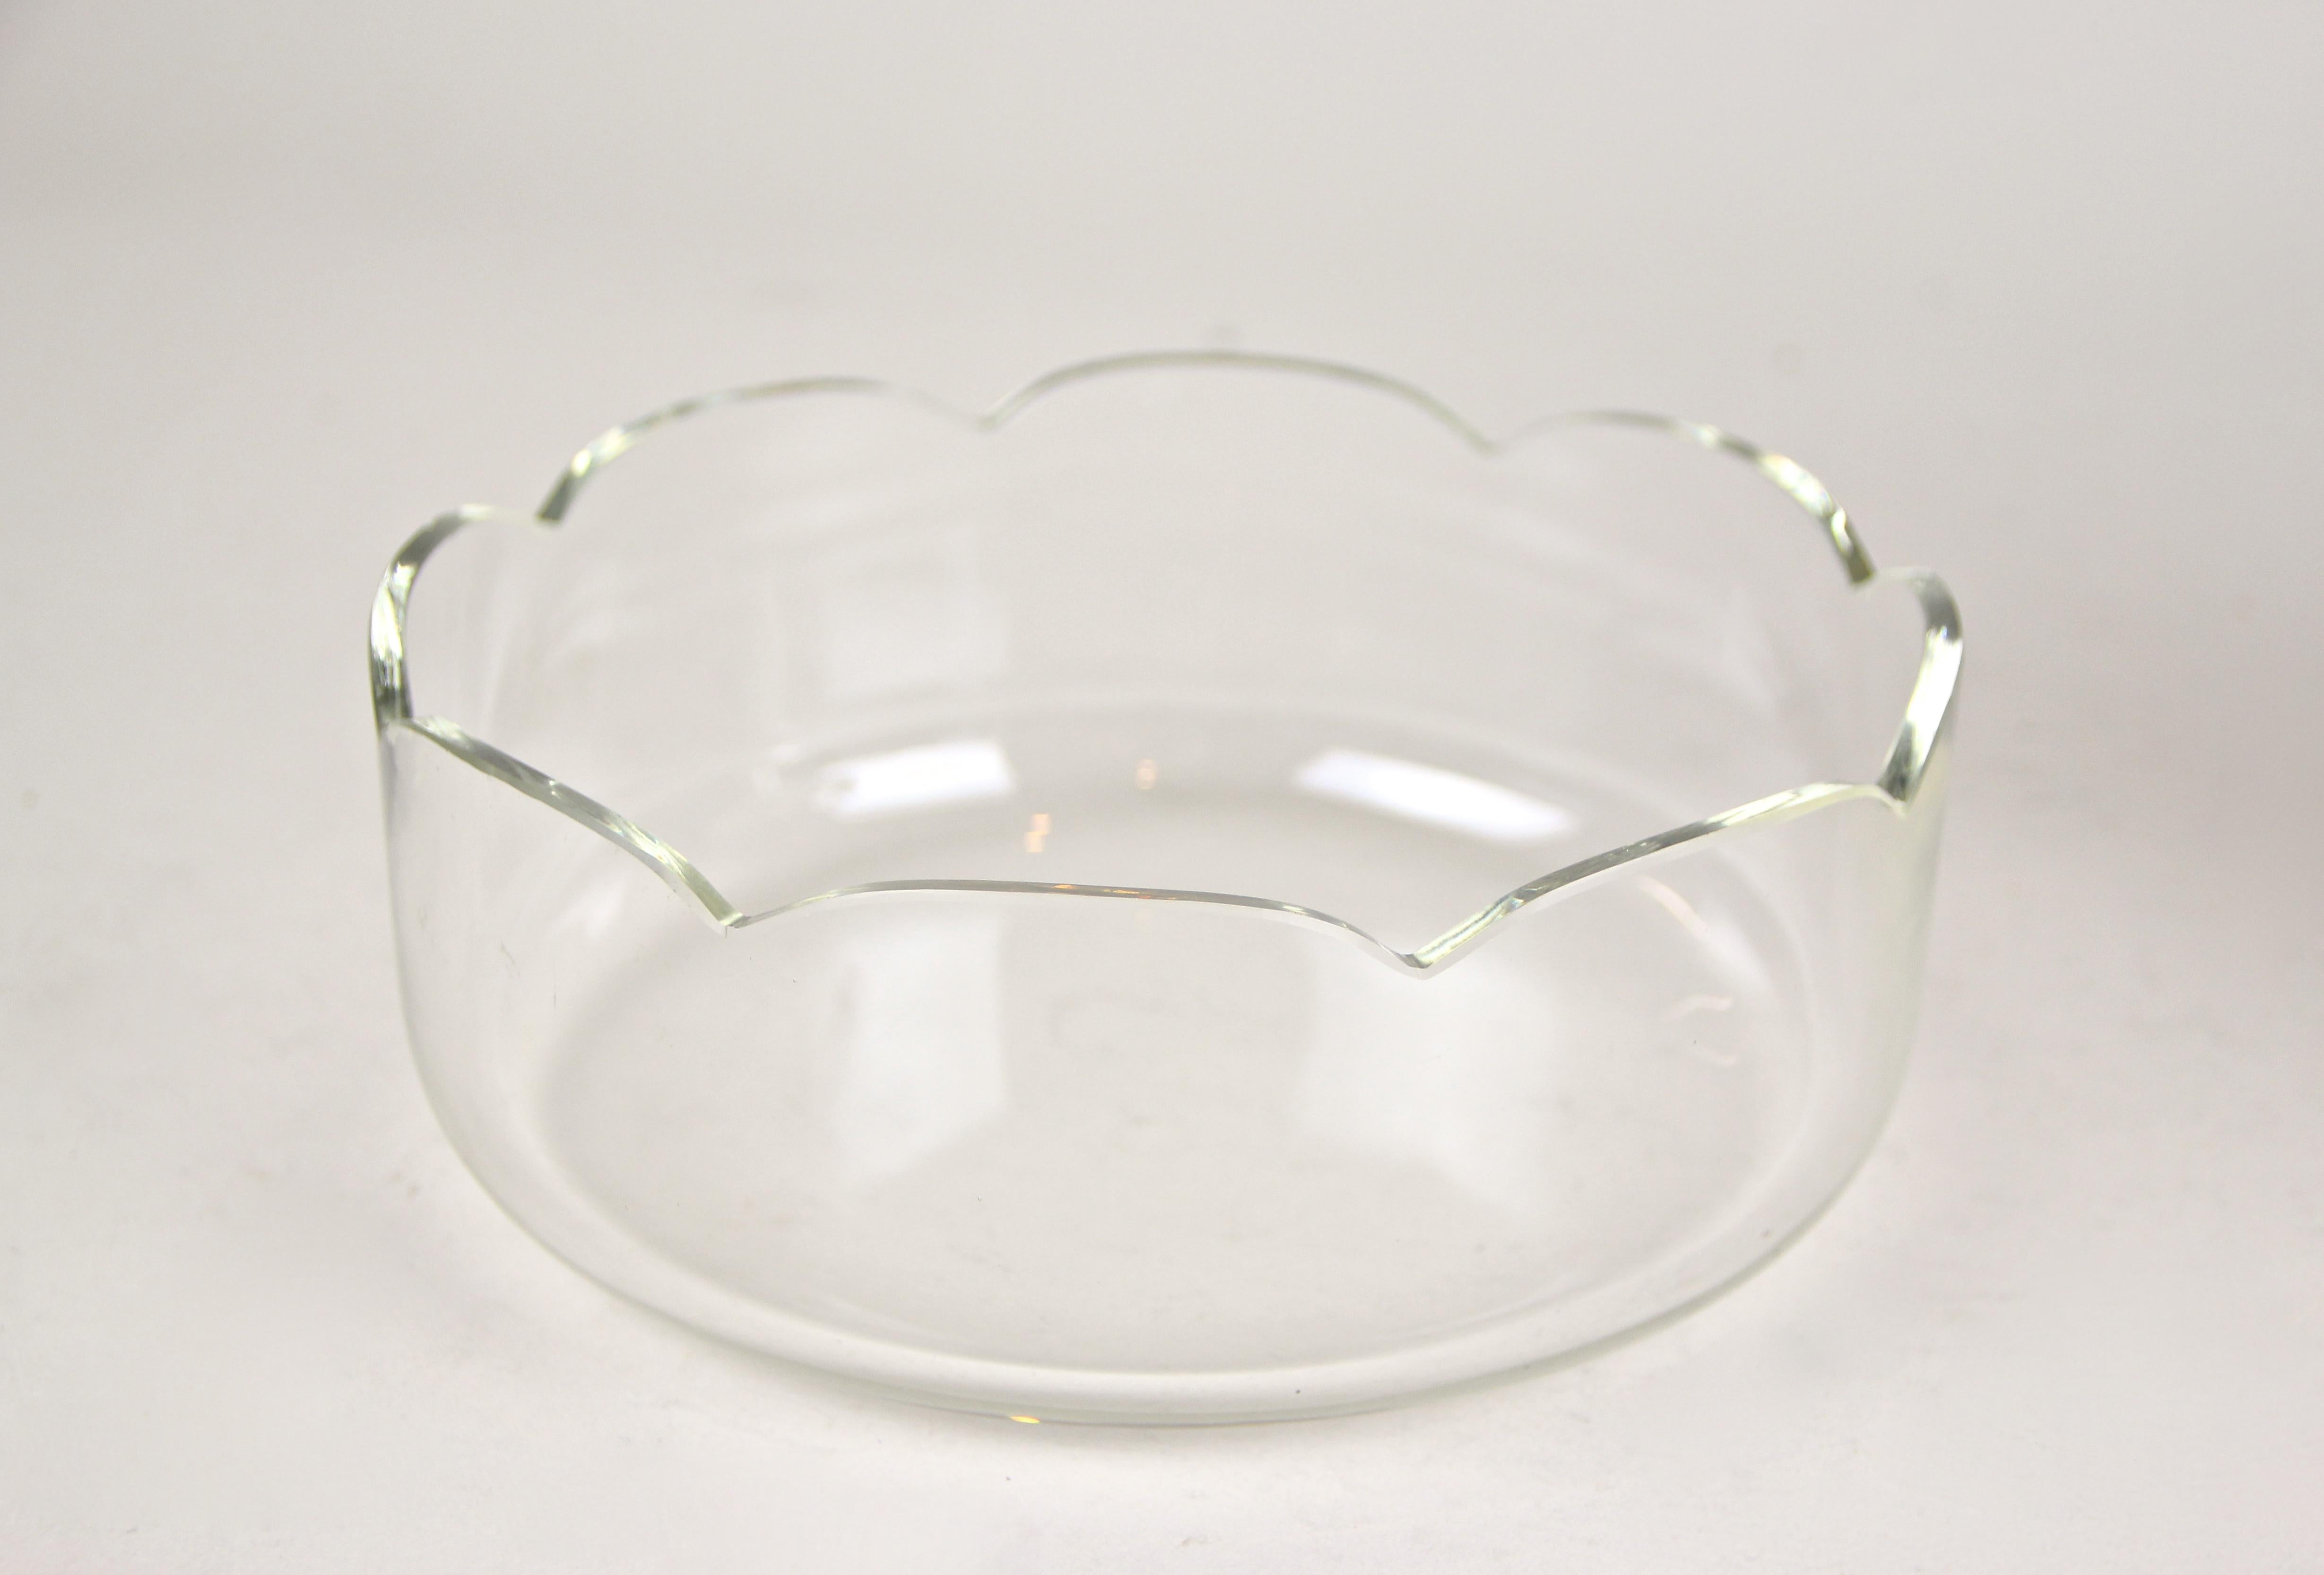 20th Century Silvered Centerpiece with Glass Bowl by WMF Art Deco, Germany, circa 1920